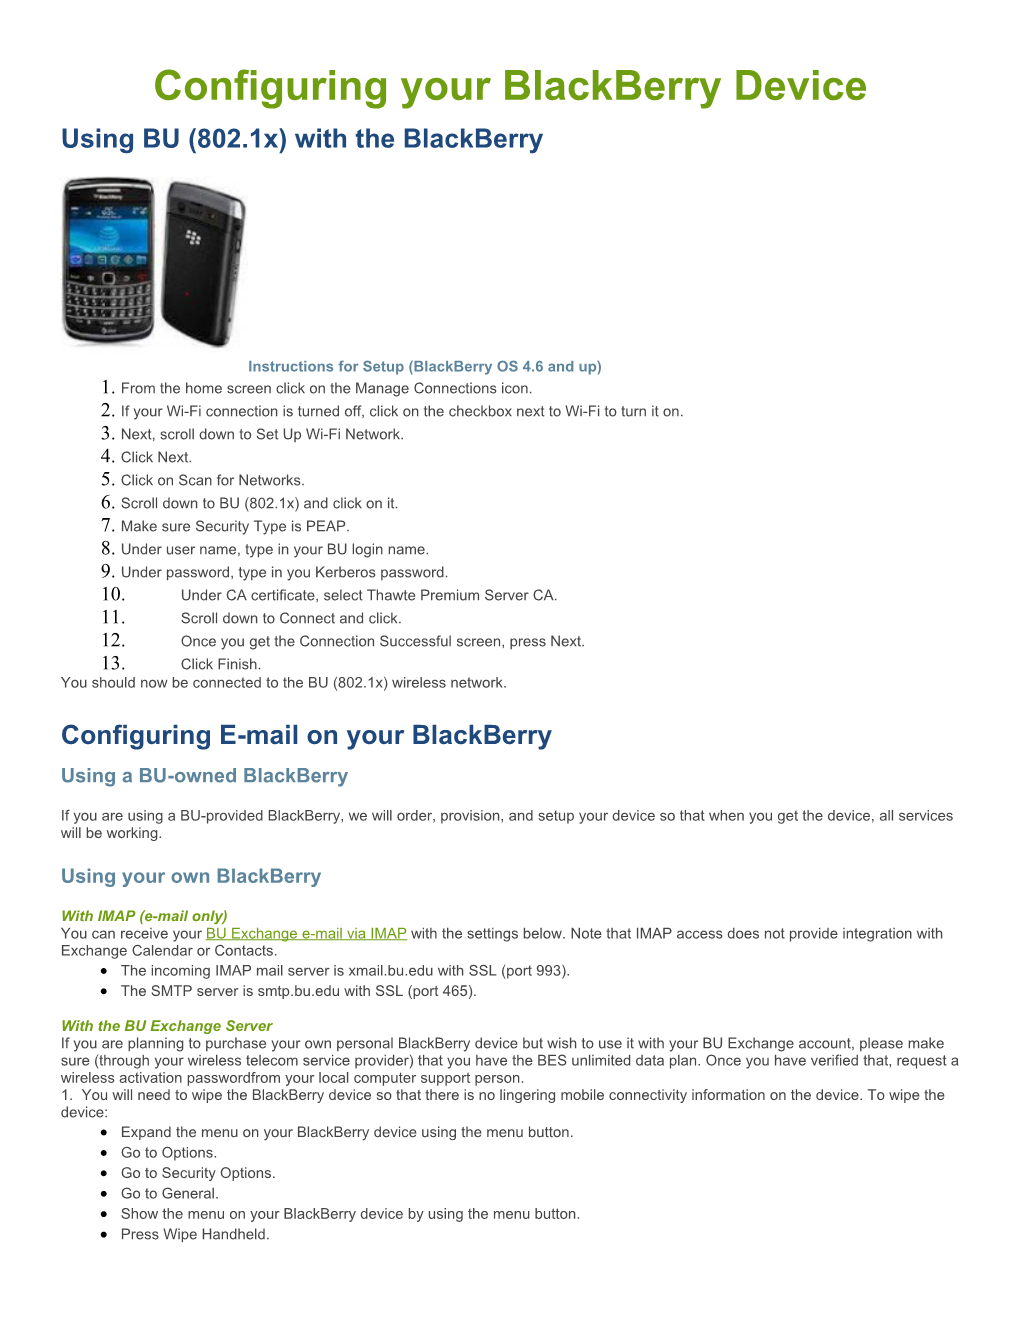 Configuring Your Blackberry Device